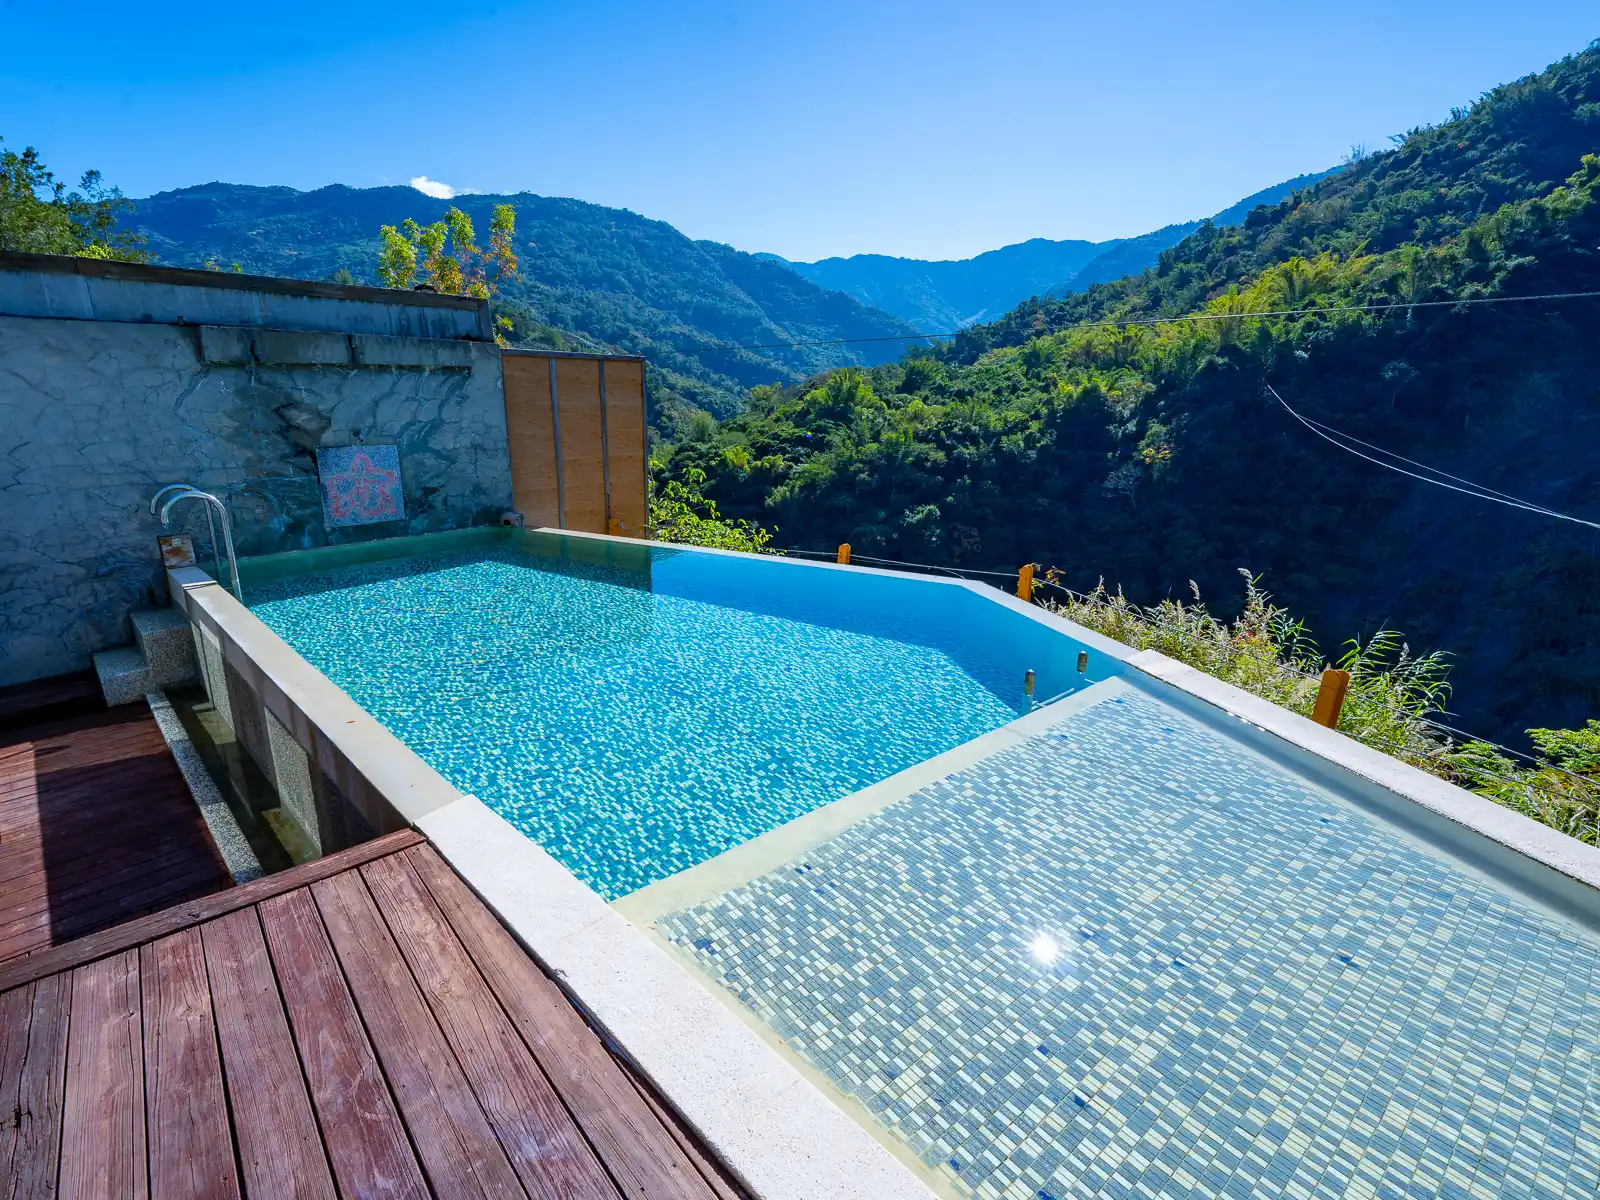 A hot spring infinity pool overlooks the surrounding forest and mountains.